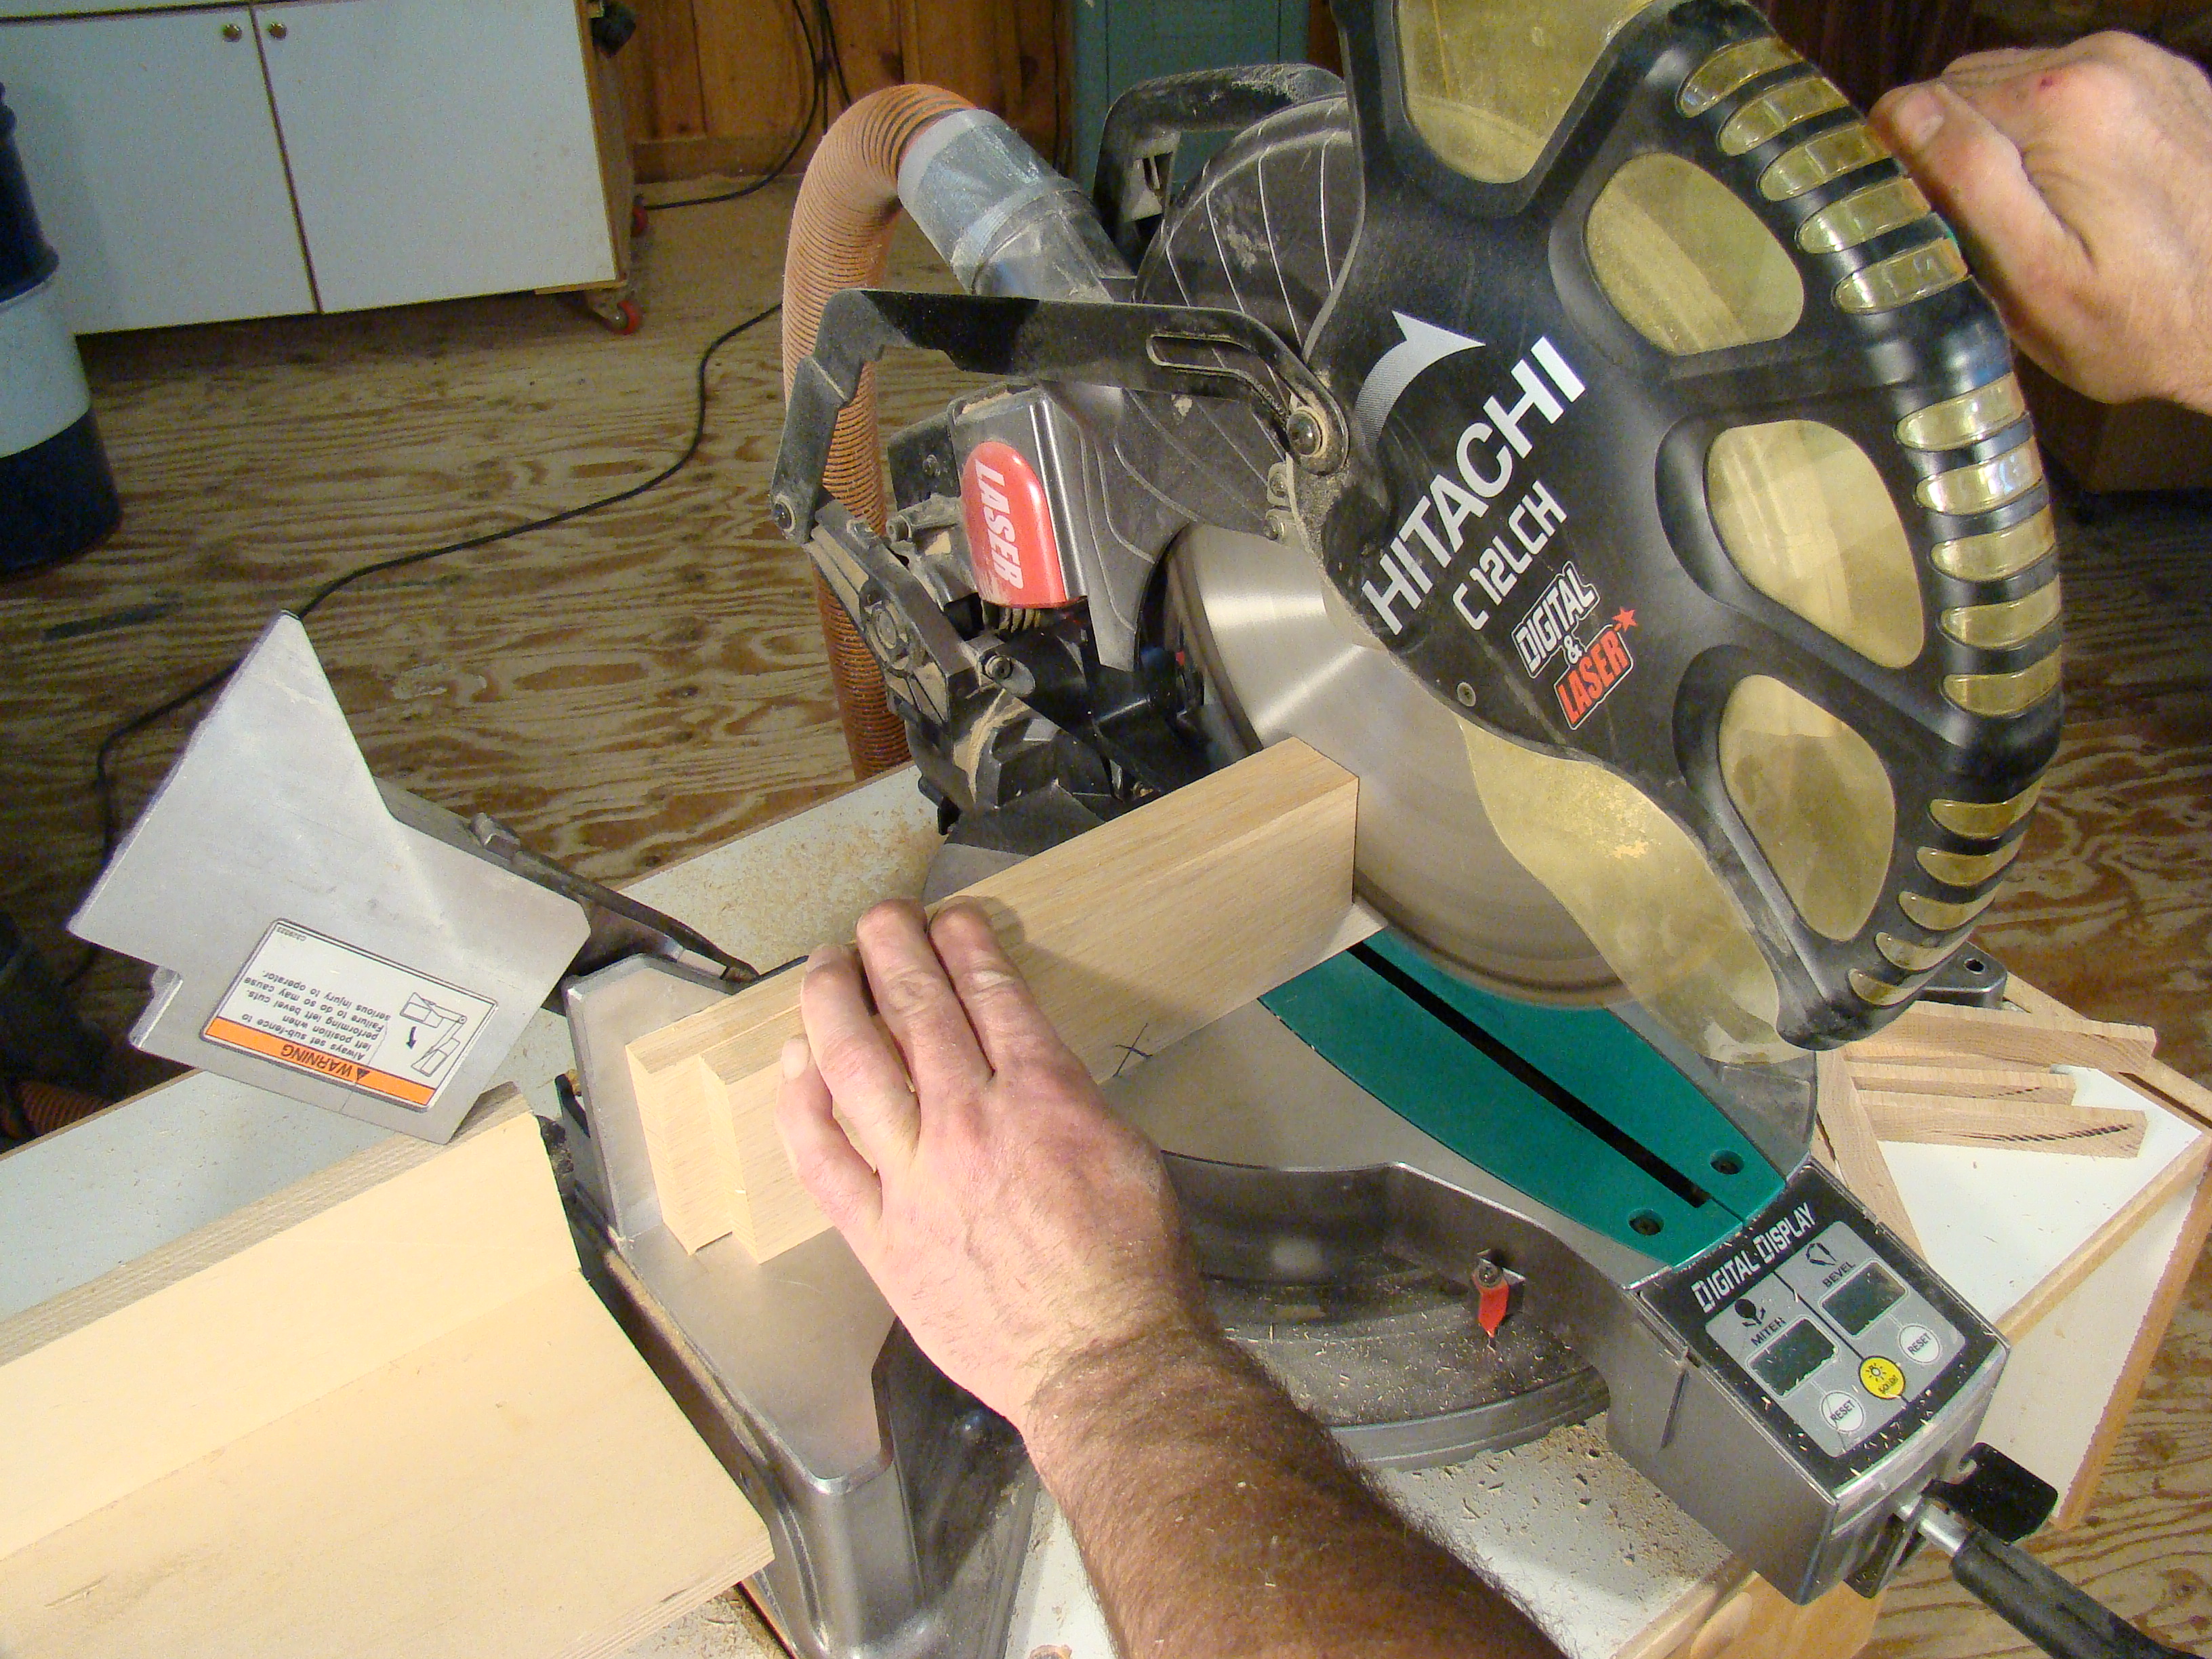 Setting up a miter saw